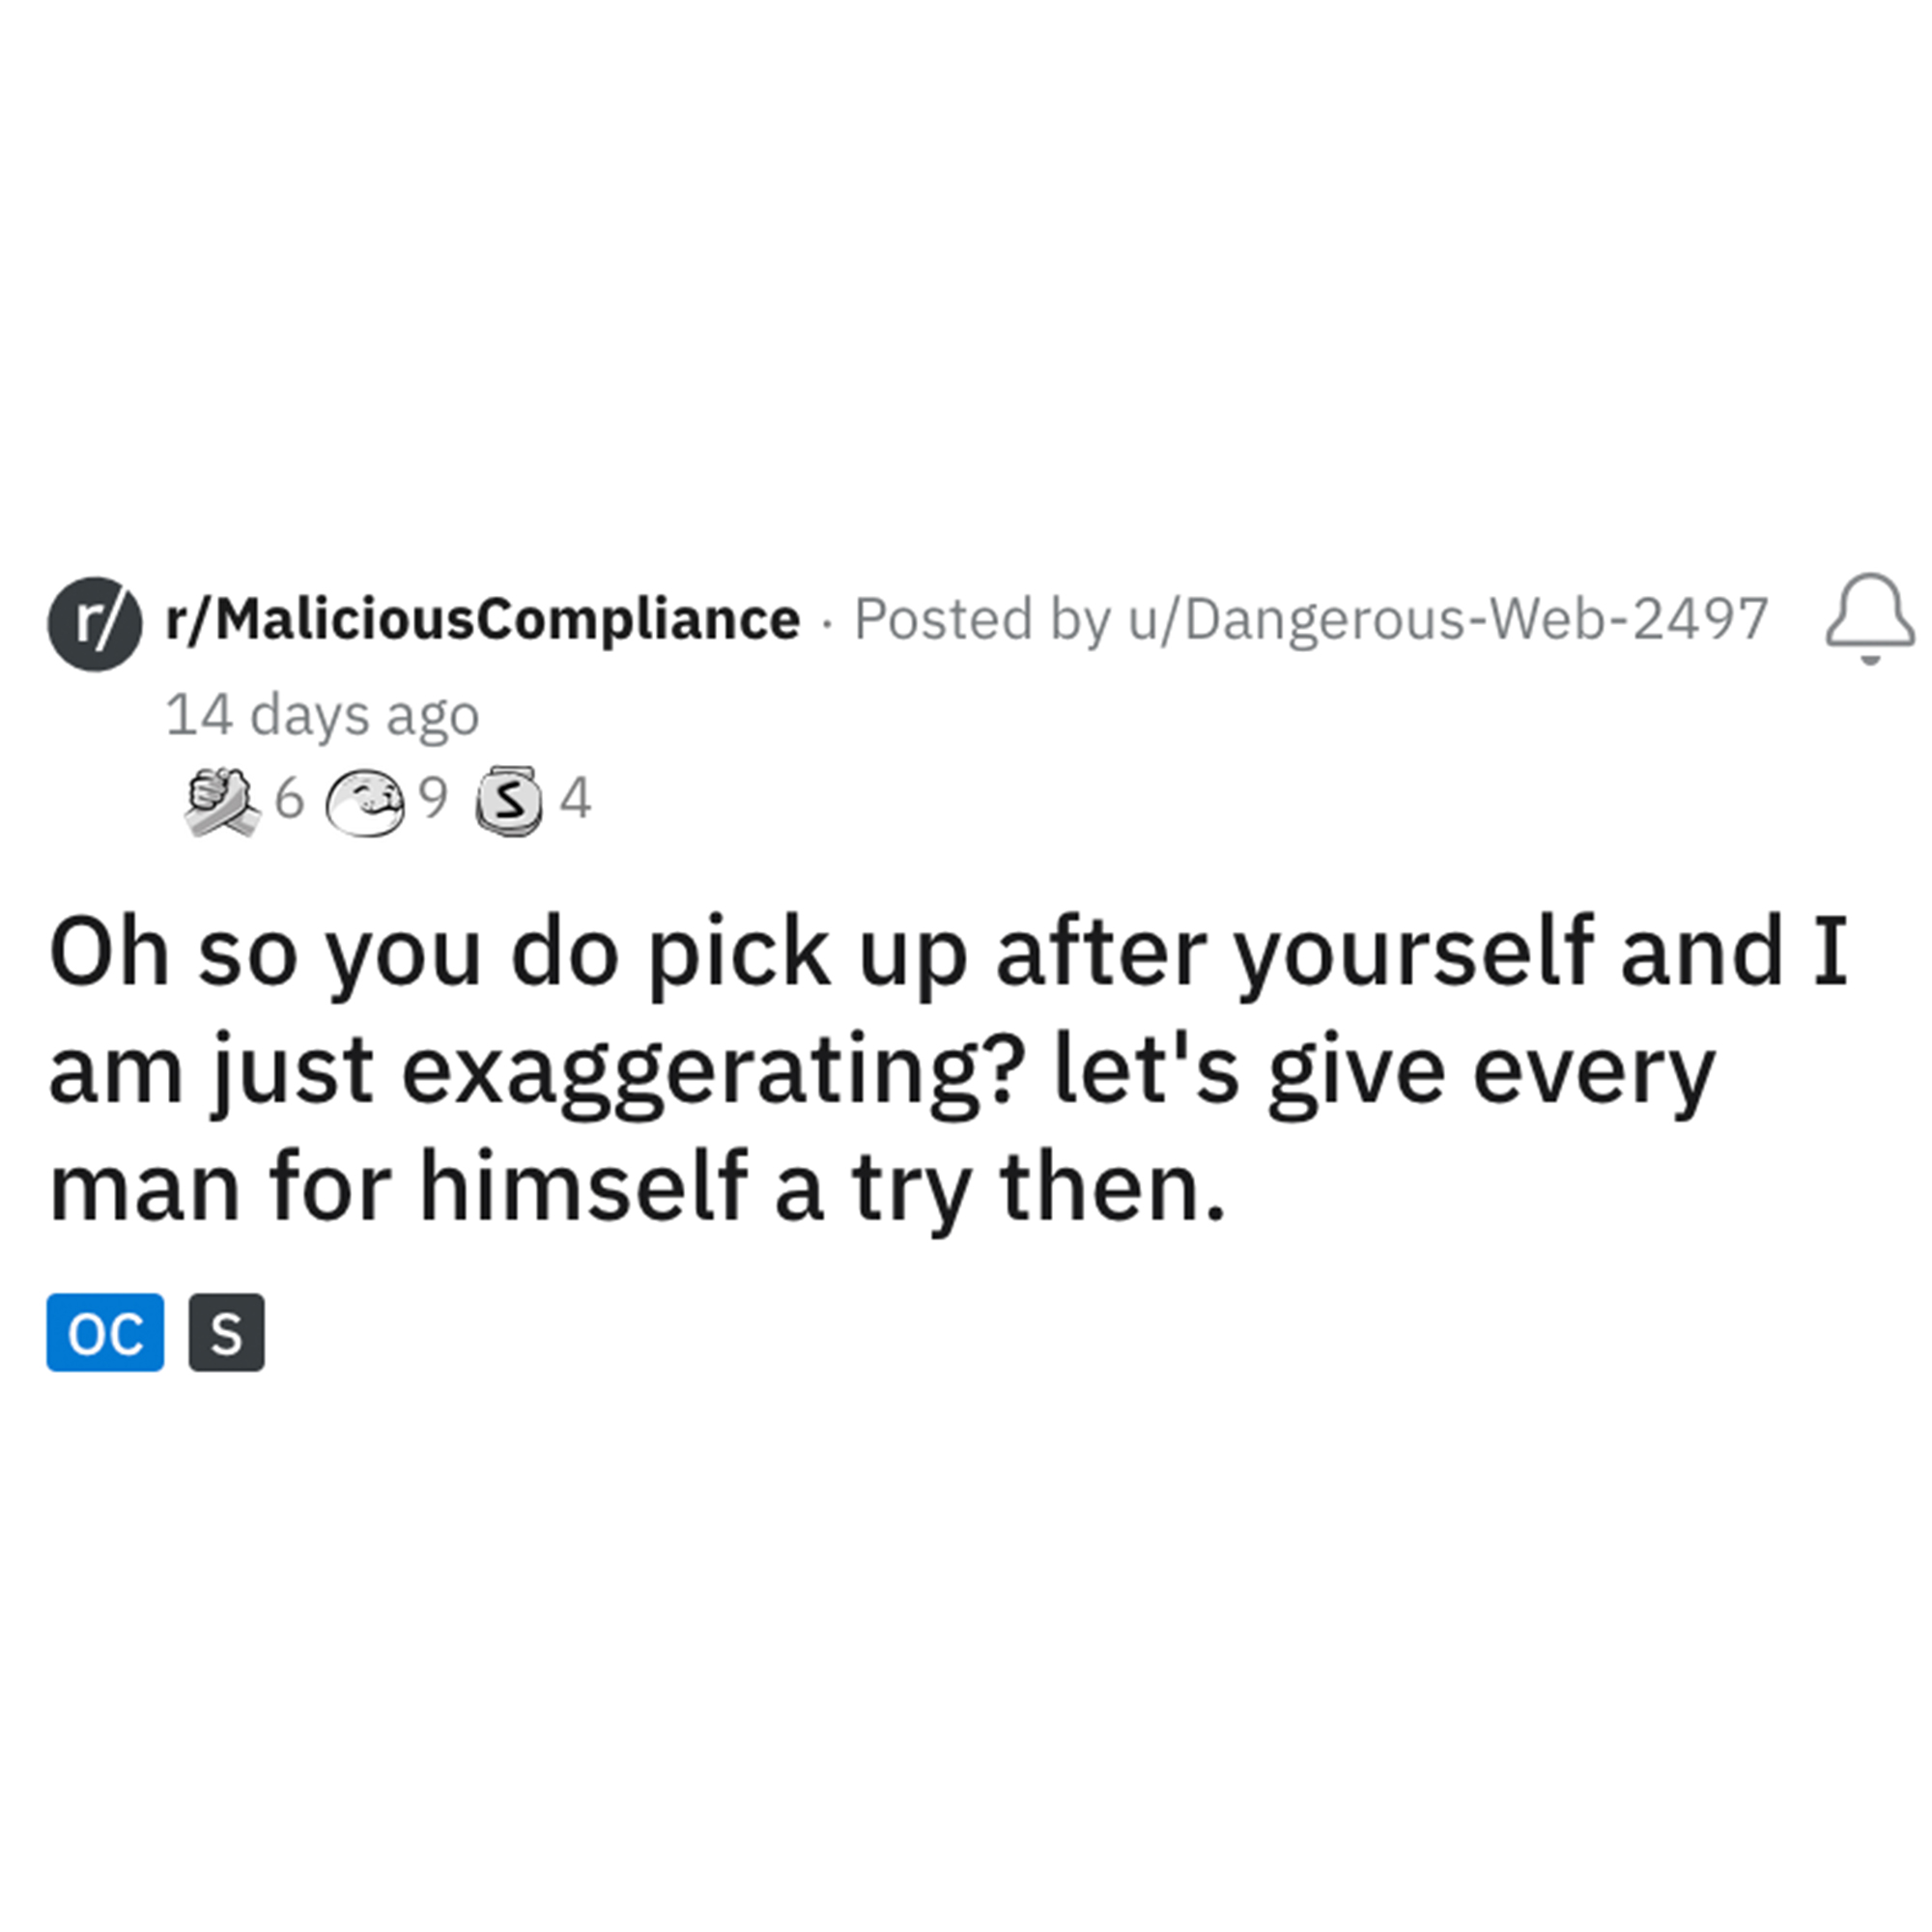 Cleaning Contest Reddit Story - cody garbrandt tweet tj dillashaw - r rMaliciousCompliance . Posted by uDangerousWeb2497 2 14 days ago 6934 6 S4 Oh so you do pick up after yourself and I am just exaggerating? let's give every man for himself a try then. O